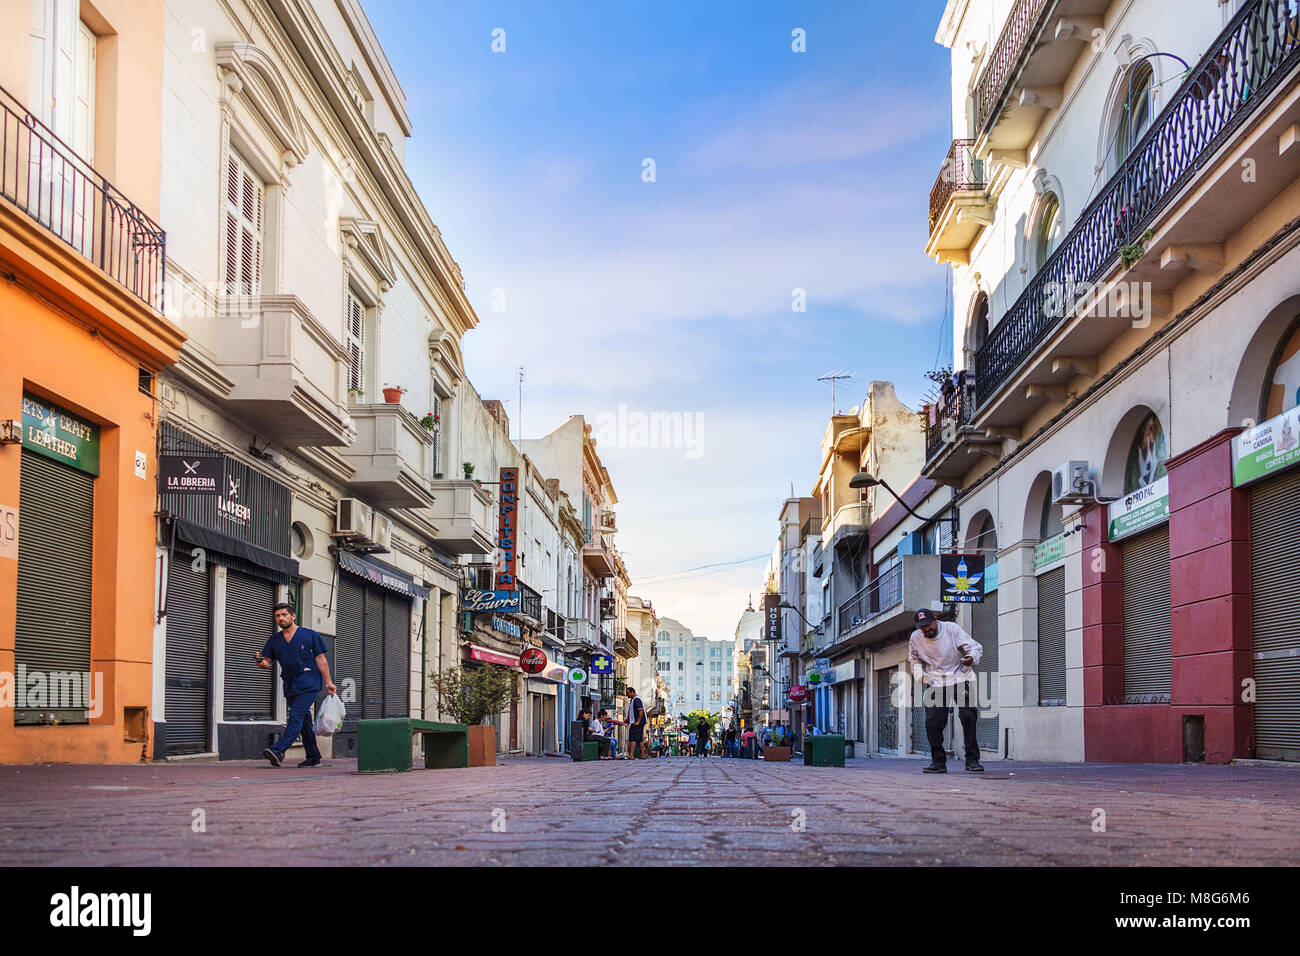 Montevideo, Uruguay - February 25th, 2018: The pedestrian street Calle Perez Castellano at the downtown near the Port of Montevideo. Stock Photo